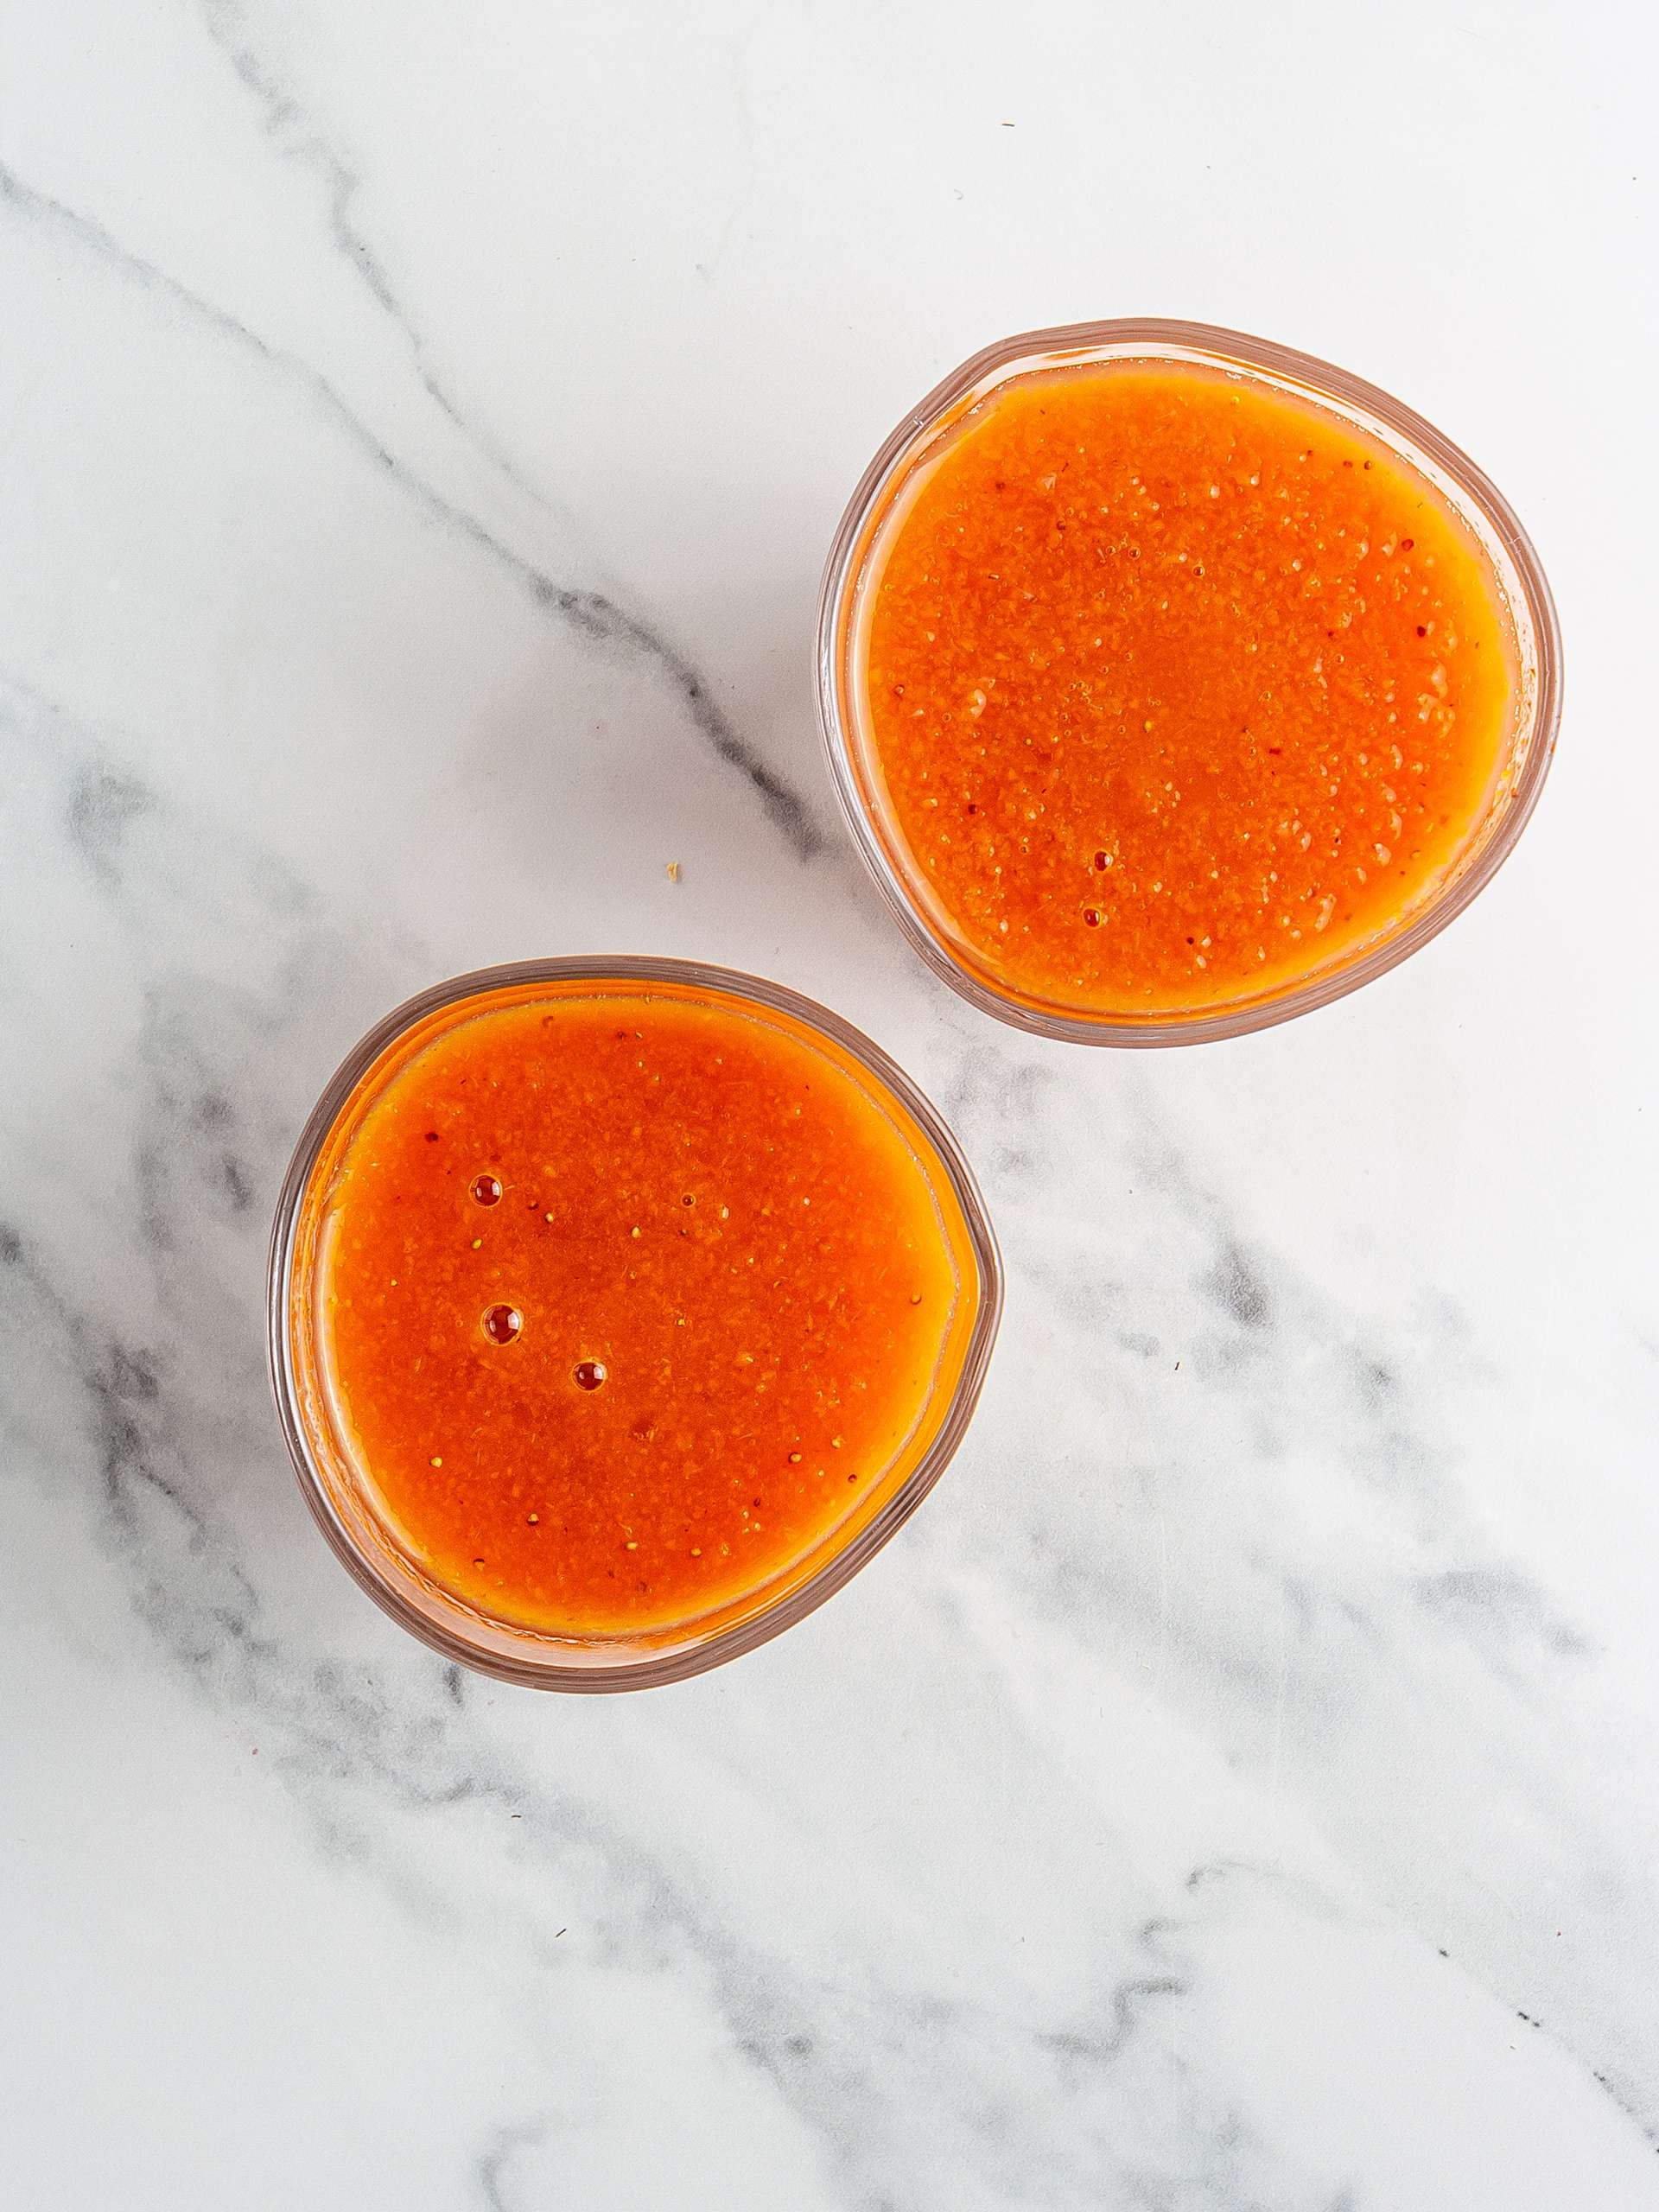 Carrot strawberry smoothie in glasses